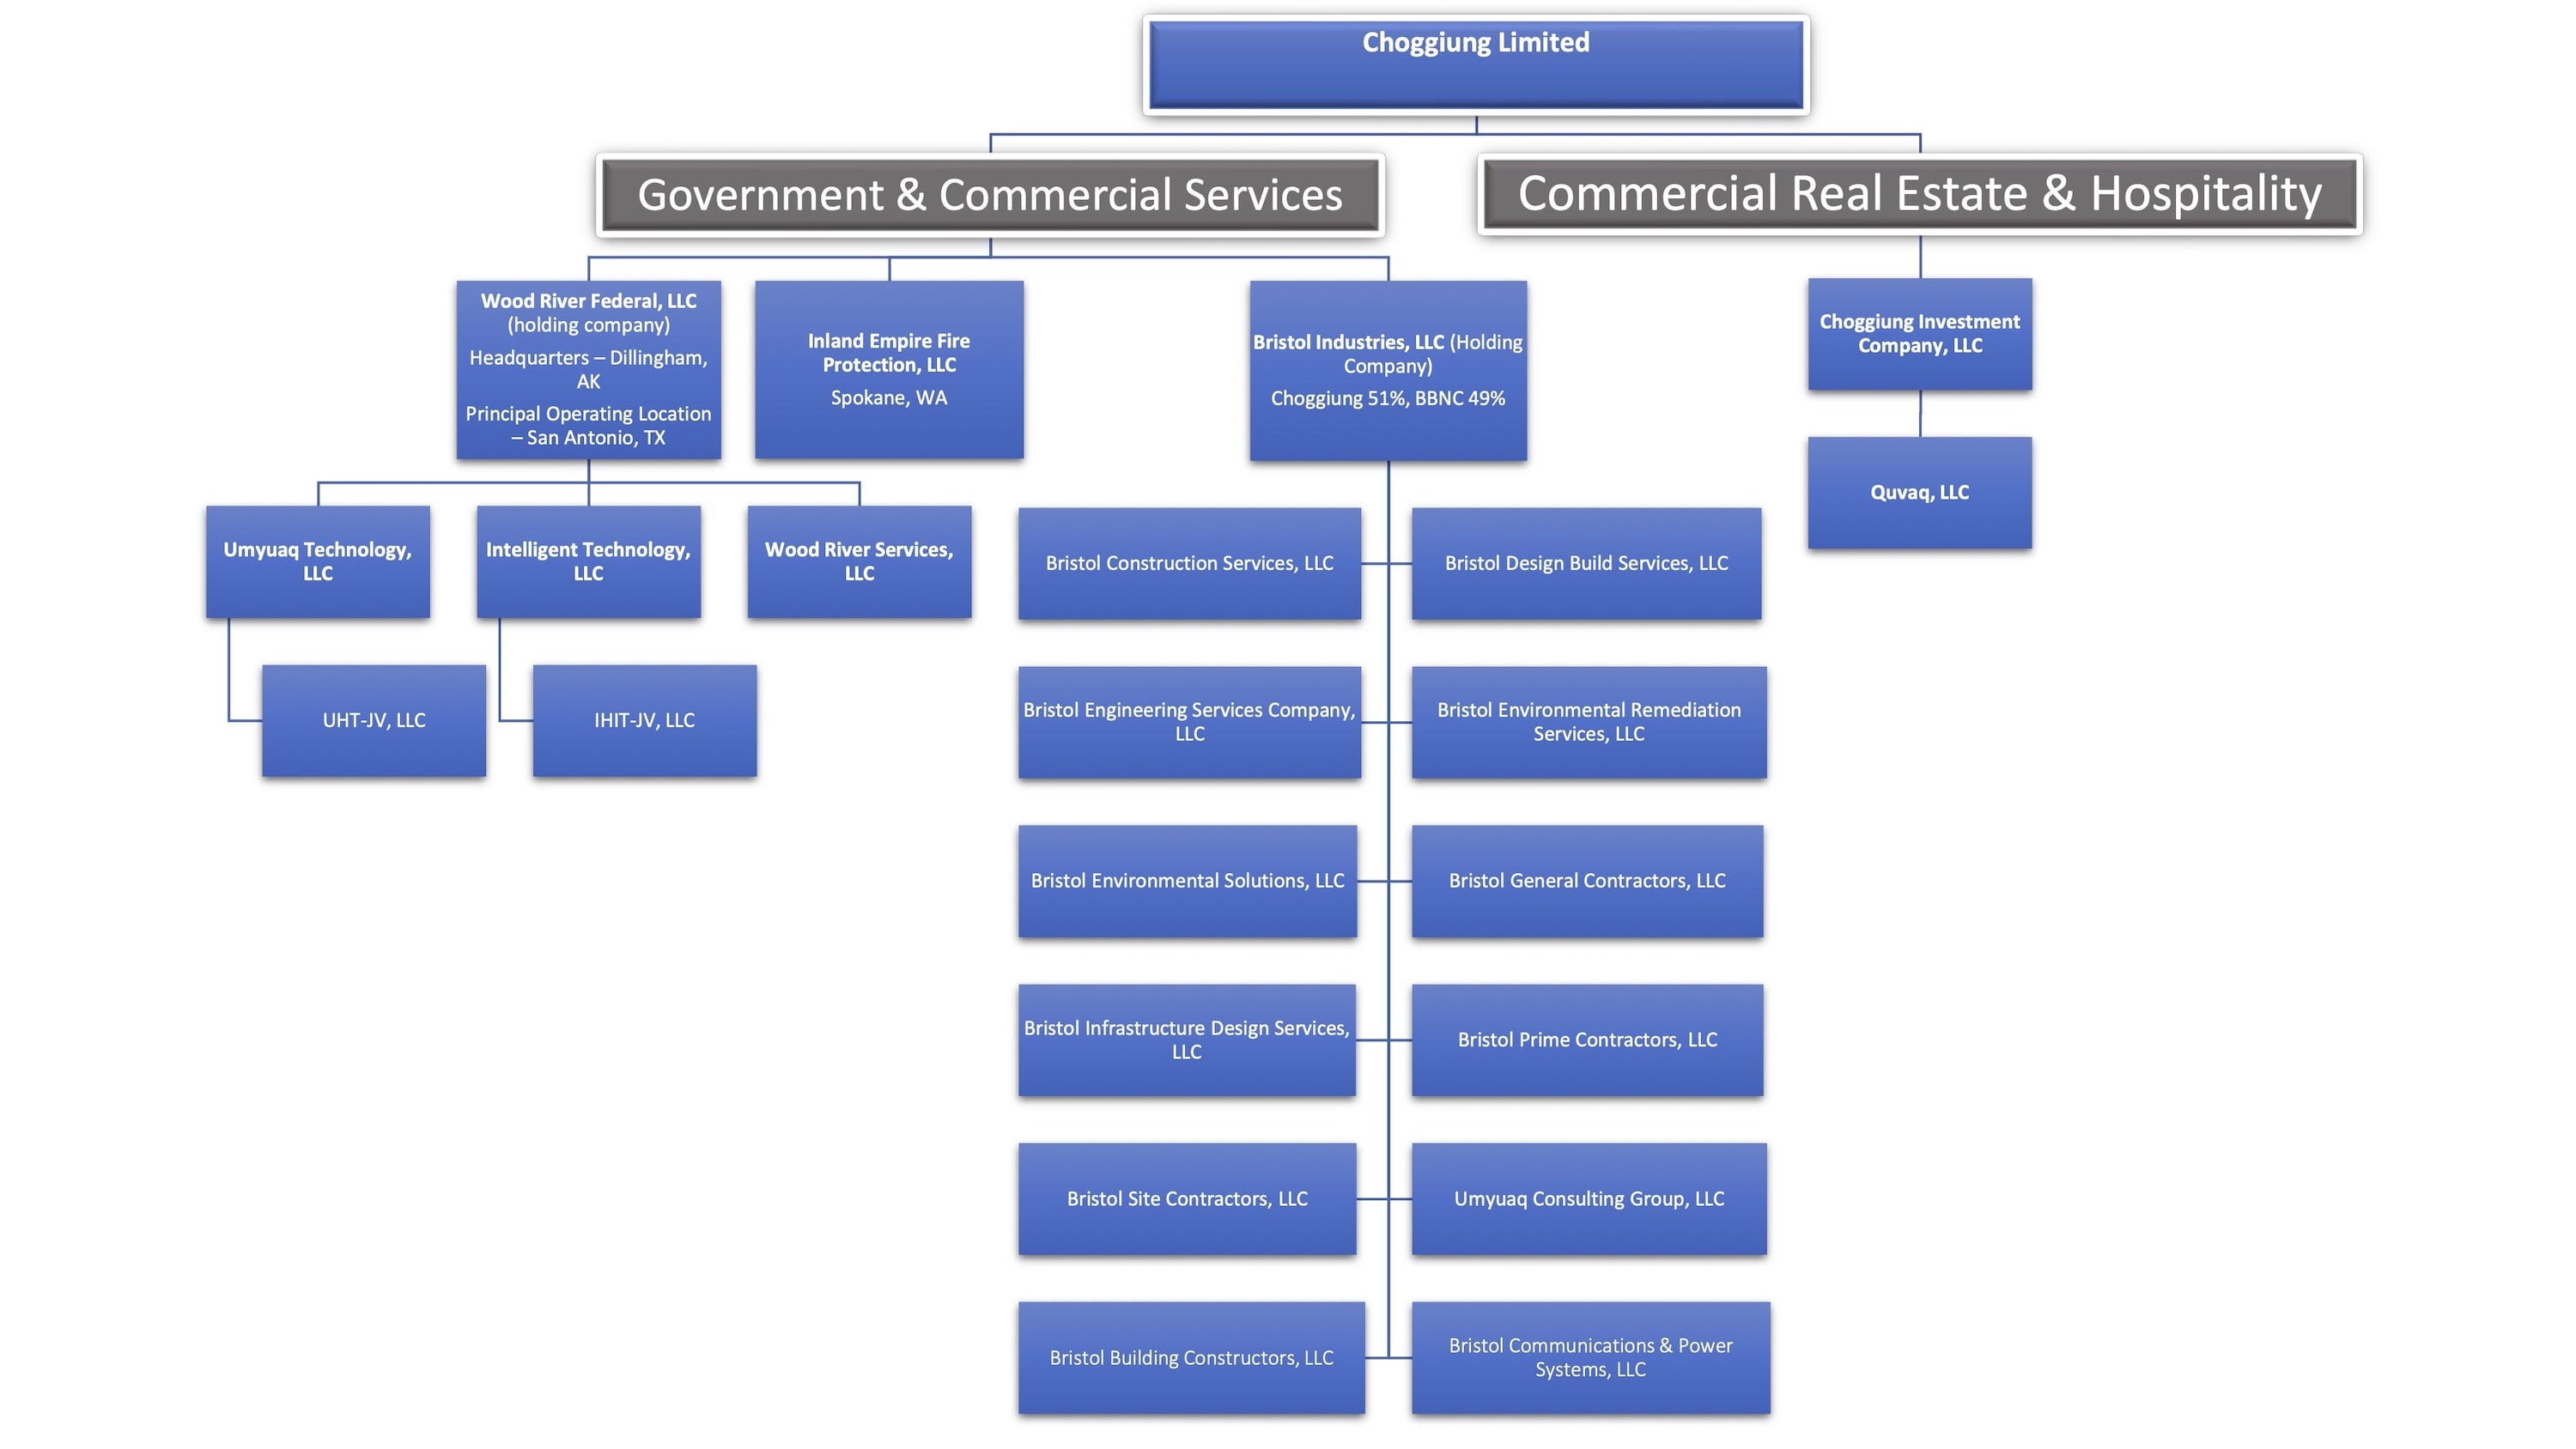 Choggiung Organizational Chart. Please contact Choggiung Shareholder Services for ADA support to read this chart.